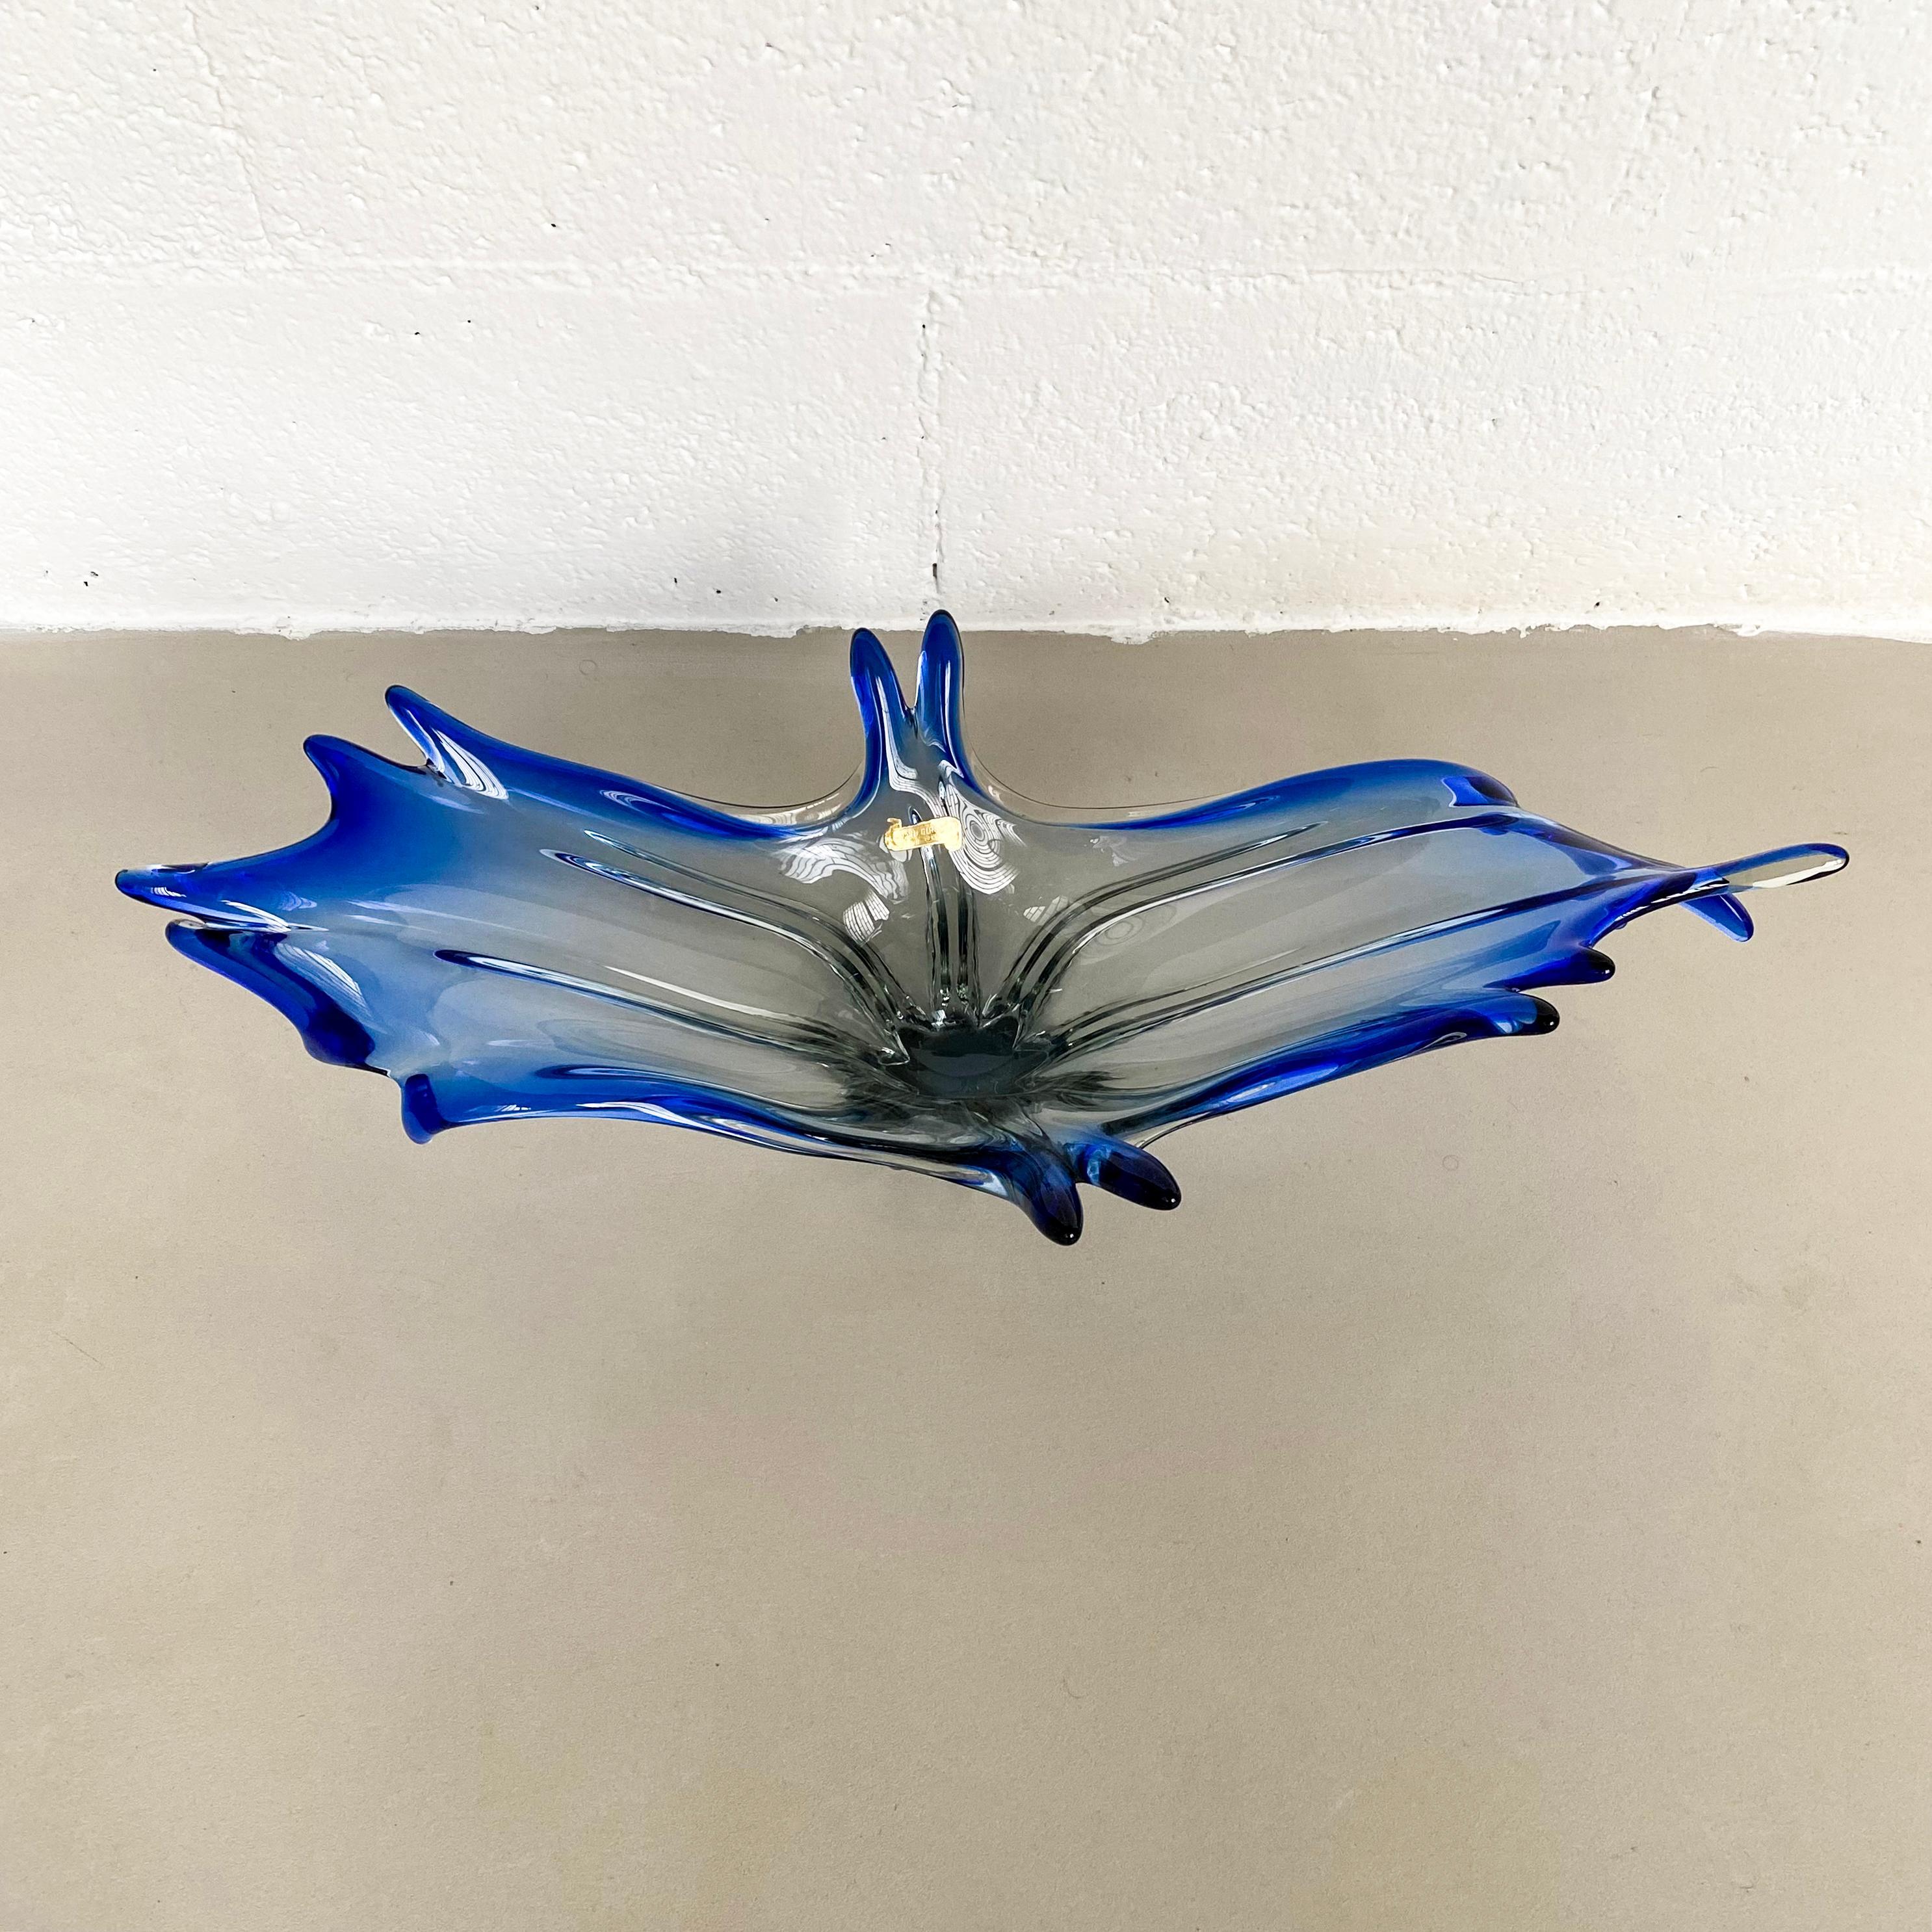 Offered for sale is an impressive, rare and extremely well preserved sculptural bowl/vase in Murano glass. Made in clear (transparent) glass, with electric blue accent on the edges, it is very big an has a great presence as a centerpiece on a table